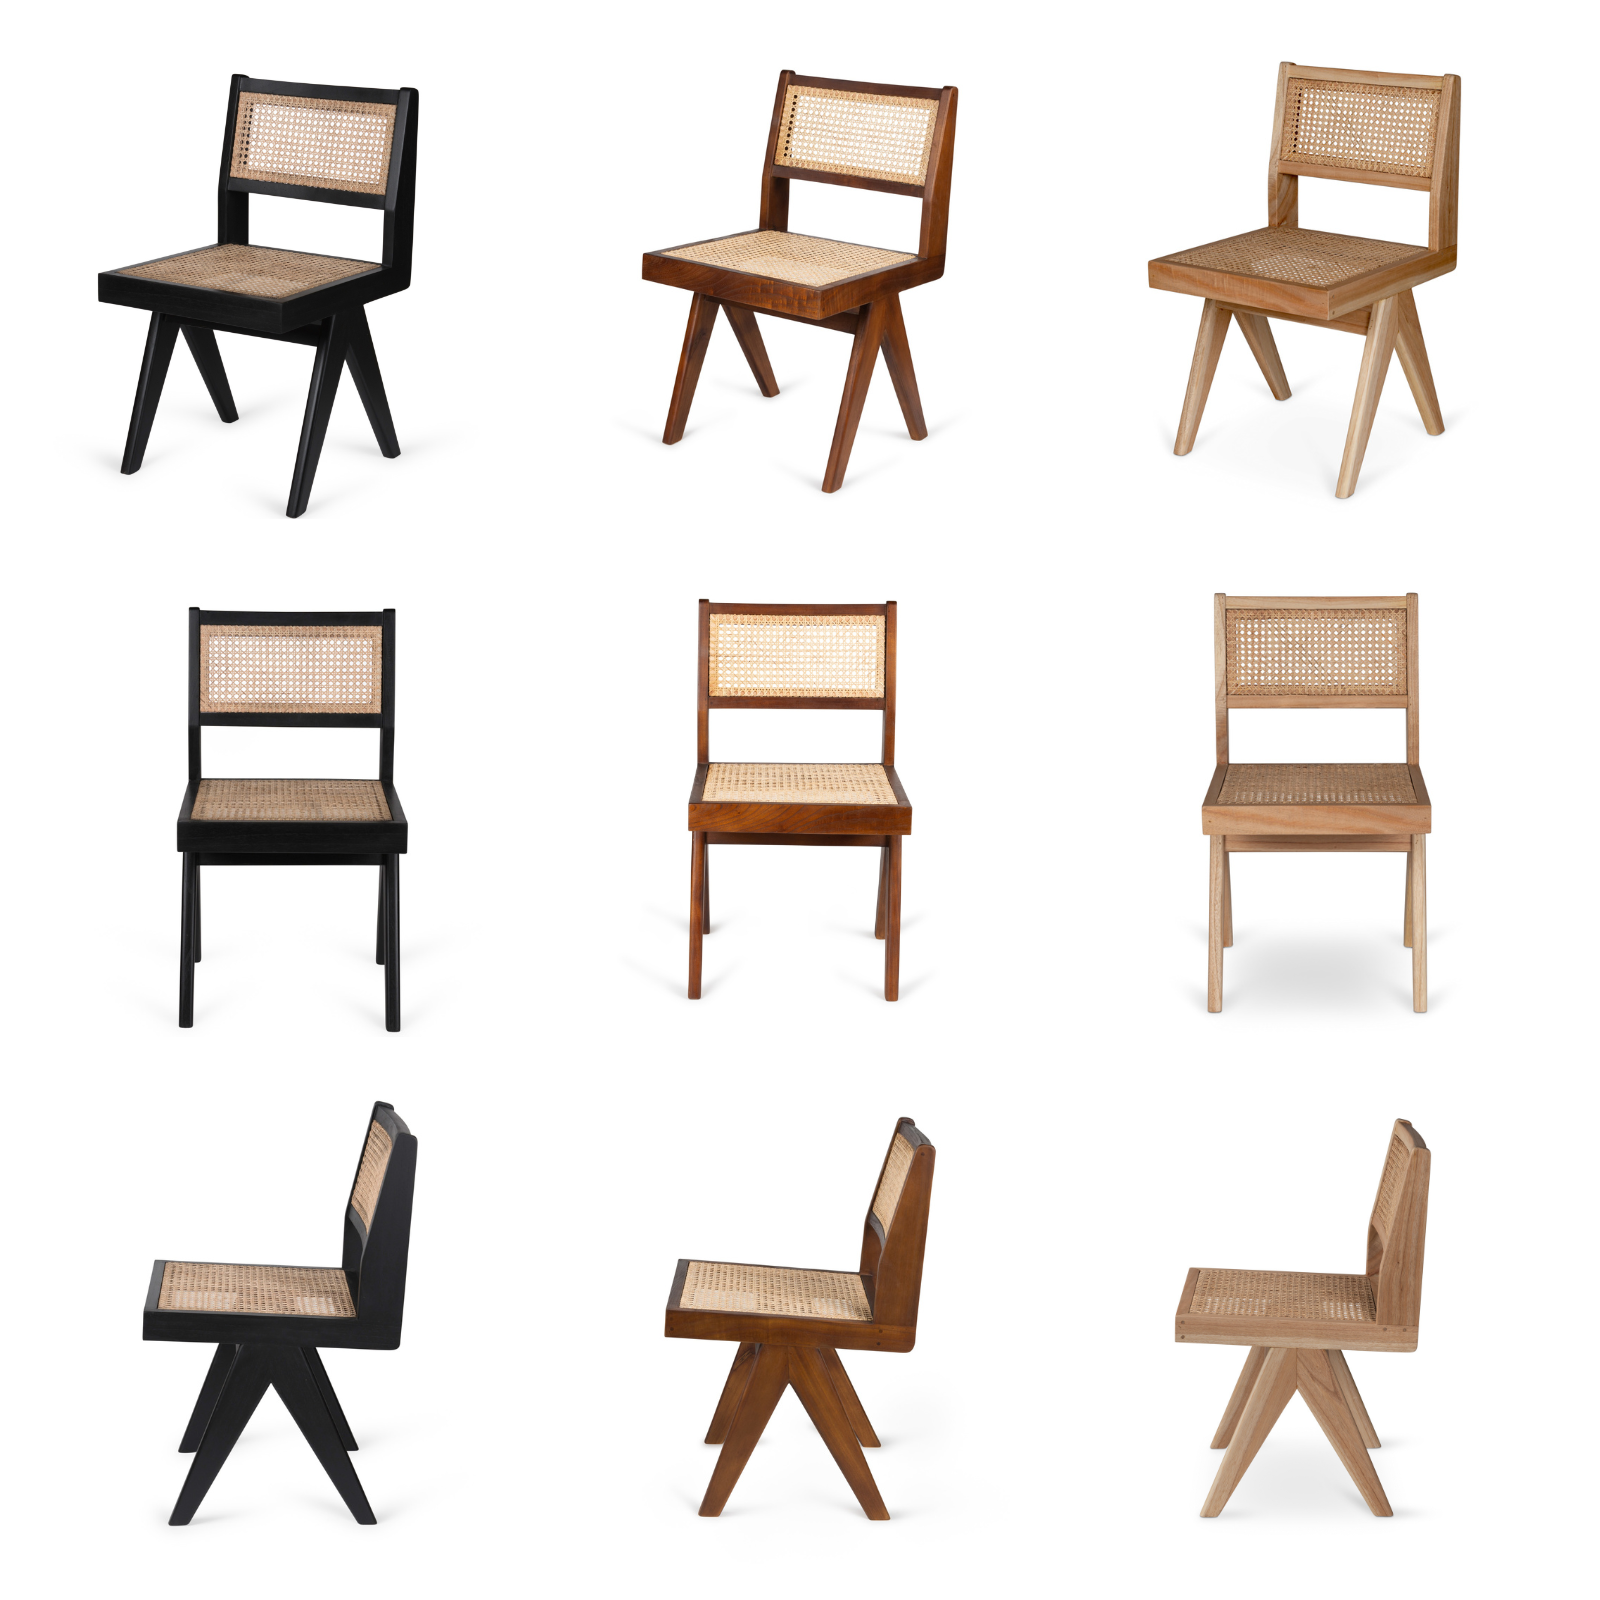 DETJER Dining Chair in Different Colours